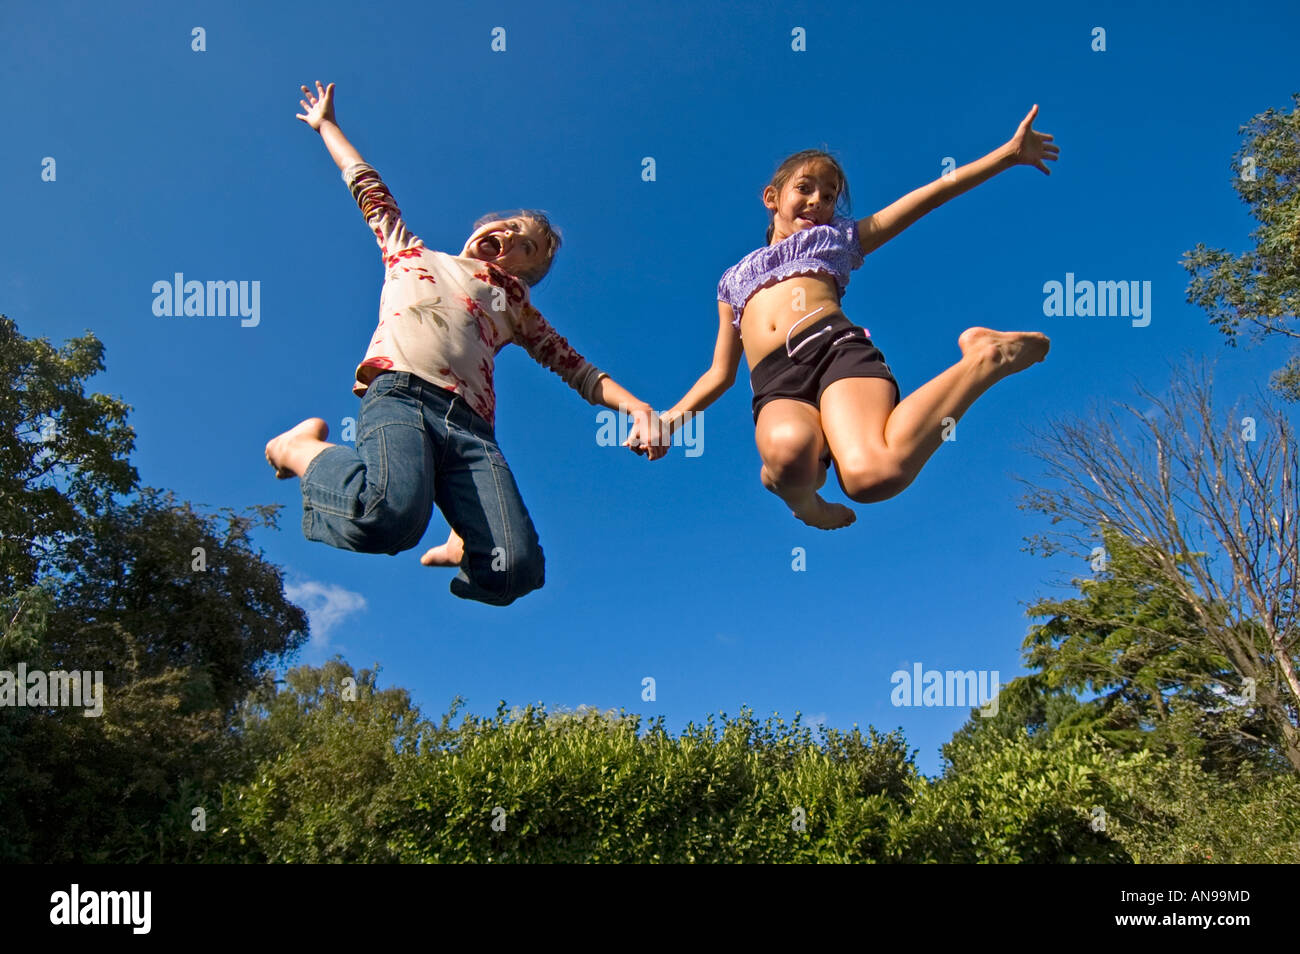 Horizontal portrait of two young caucasian girls in mid air against a blue sky, bouncing on a trampoline. Stock Photo